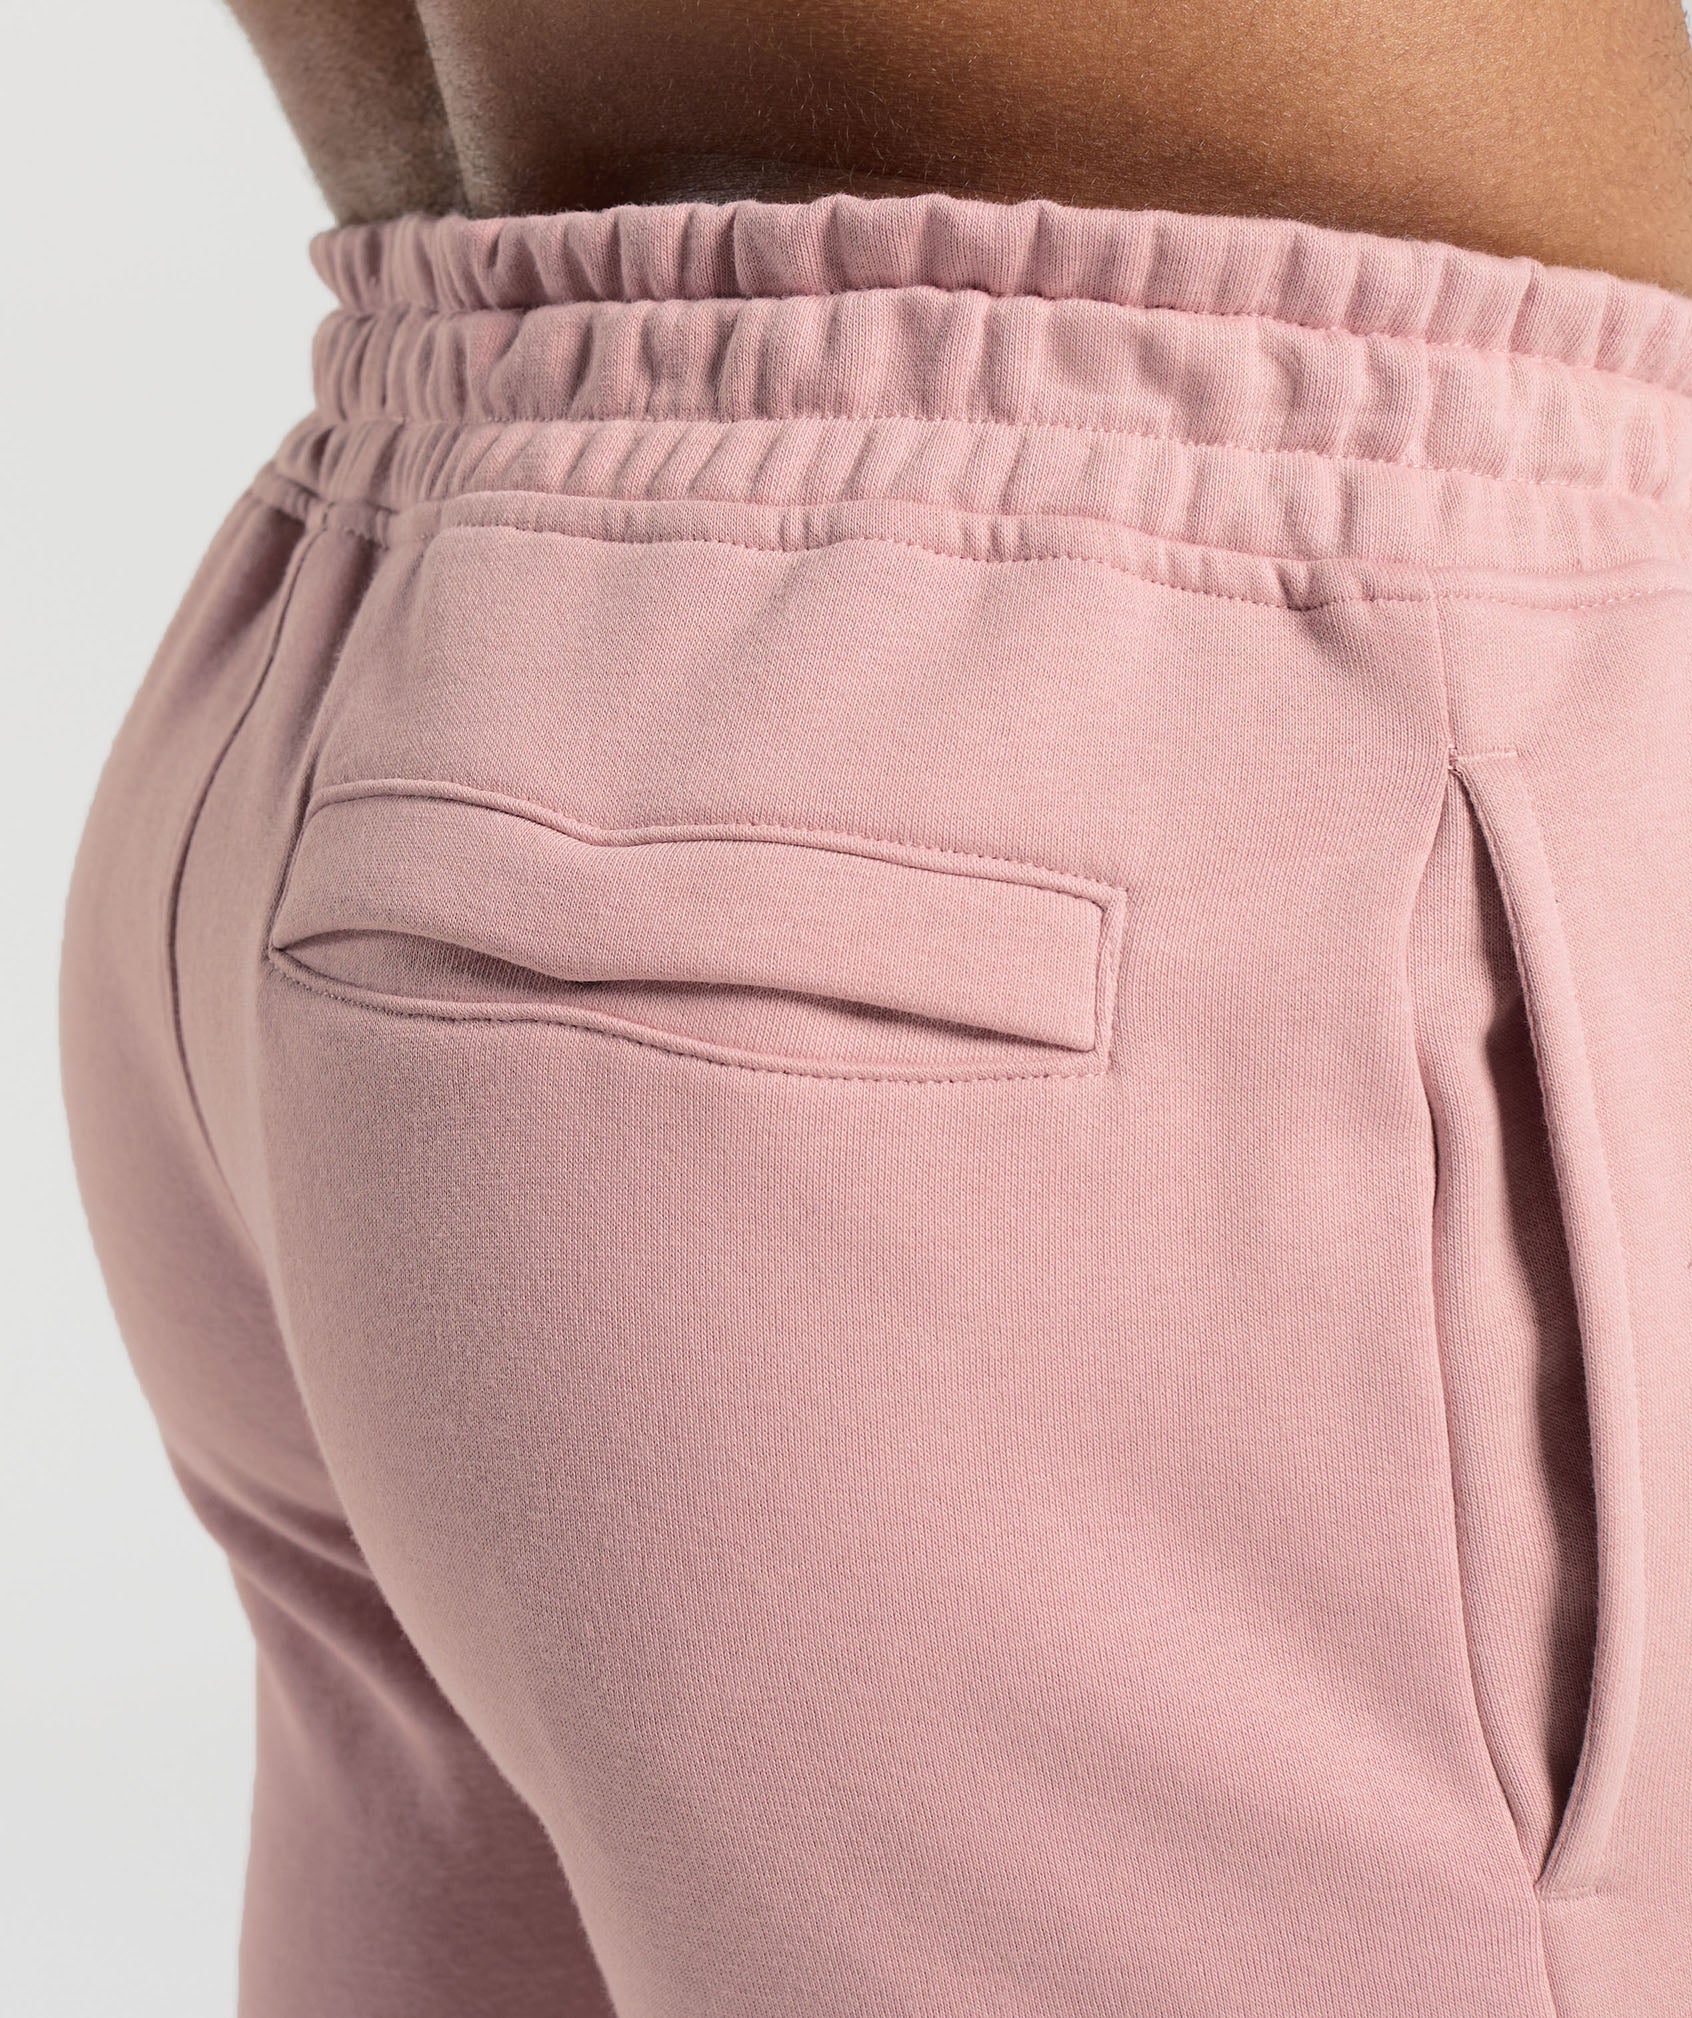 Heavy Duty Apparel 7" Shorts in Light Pink - view 8